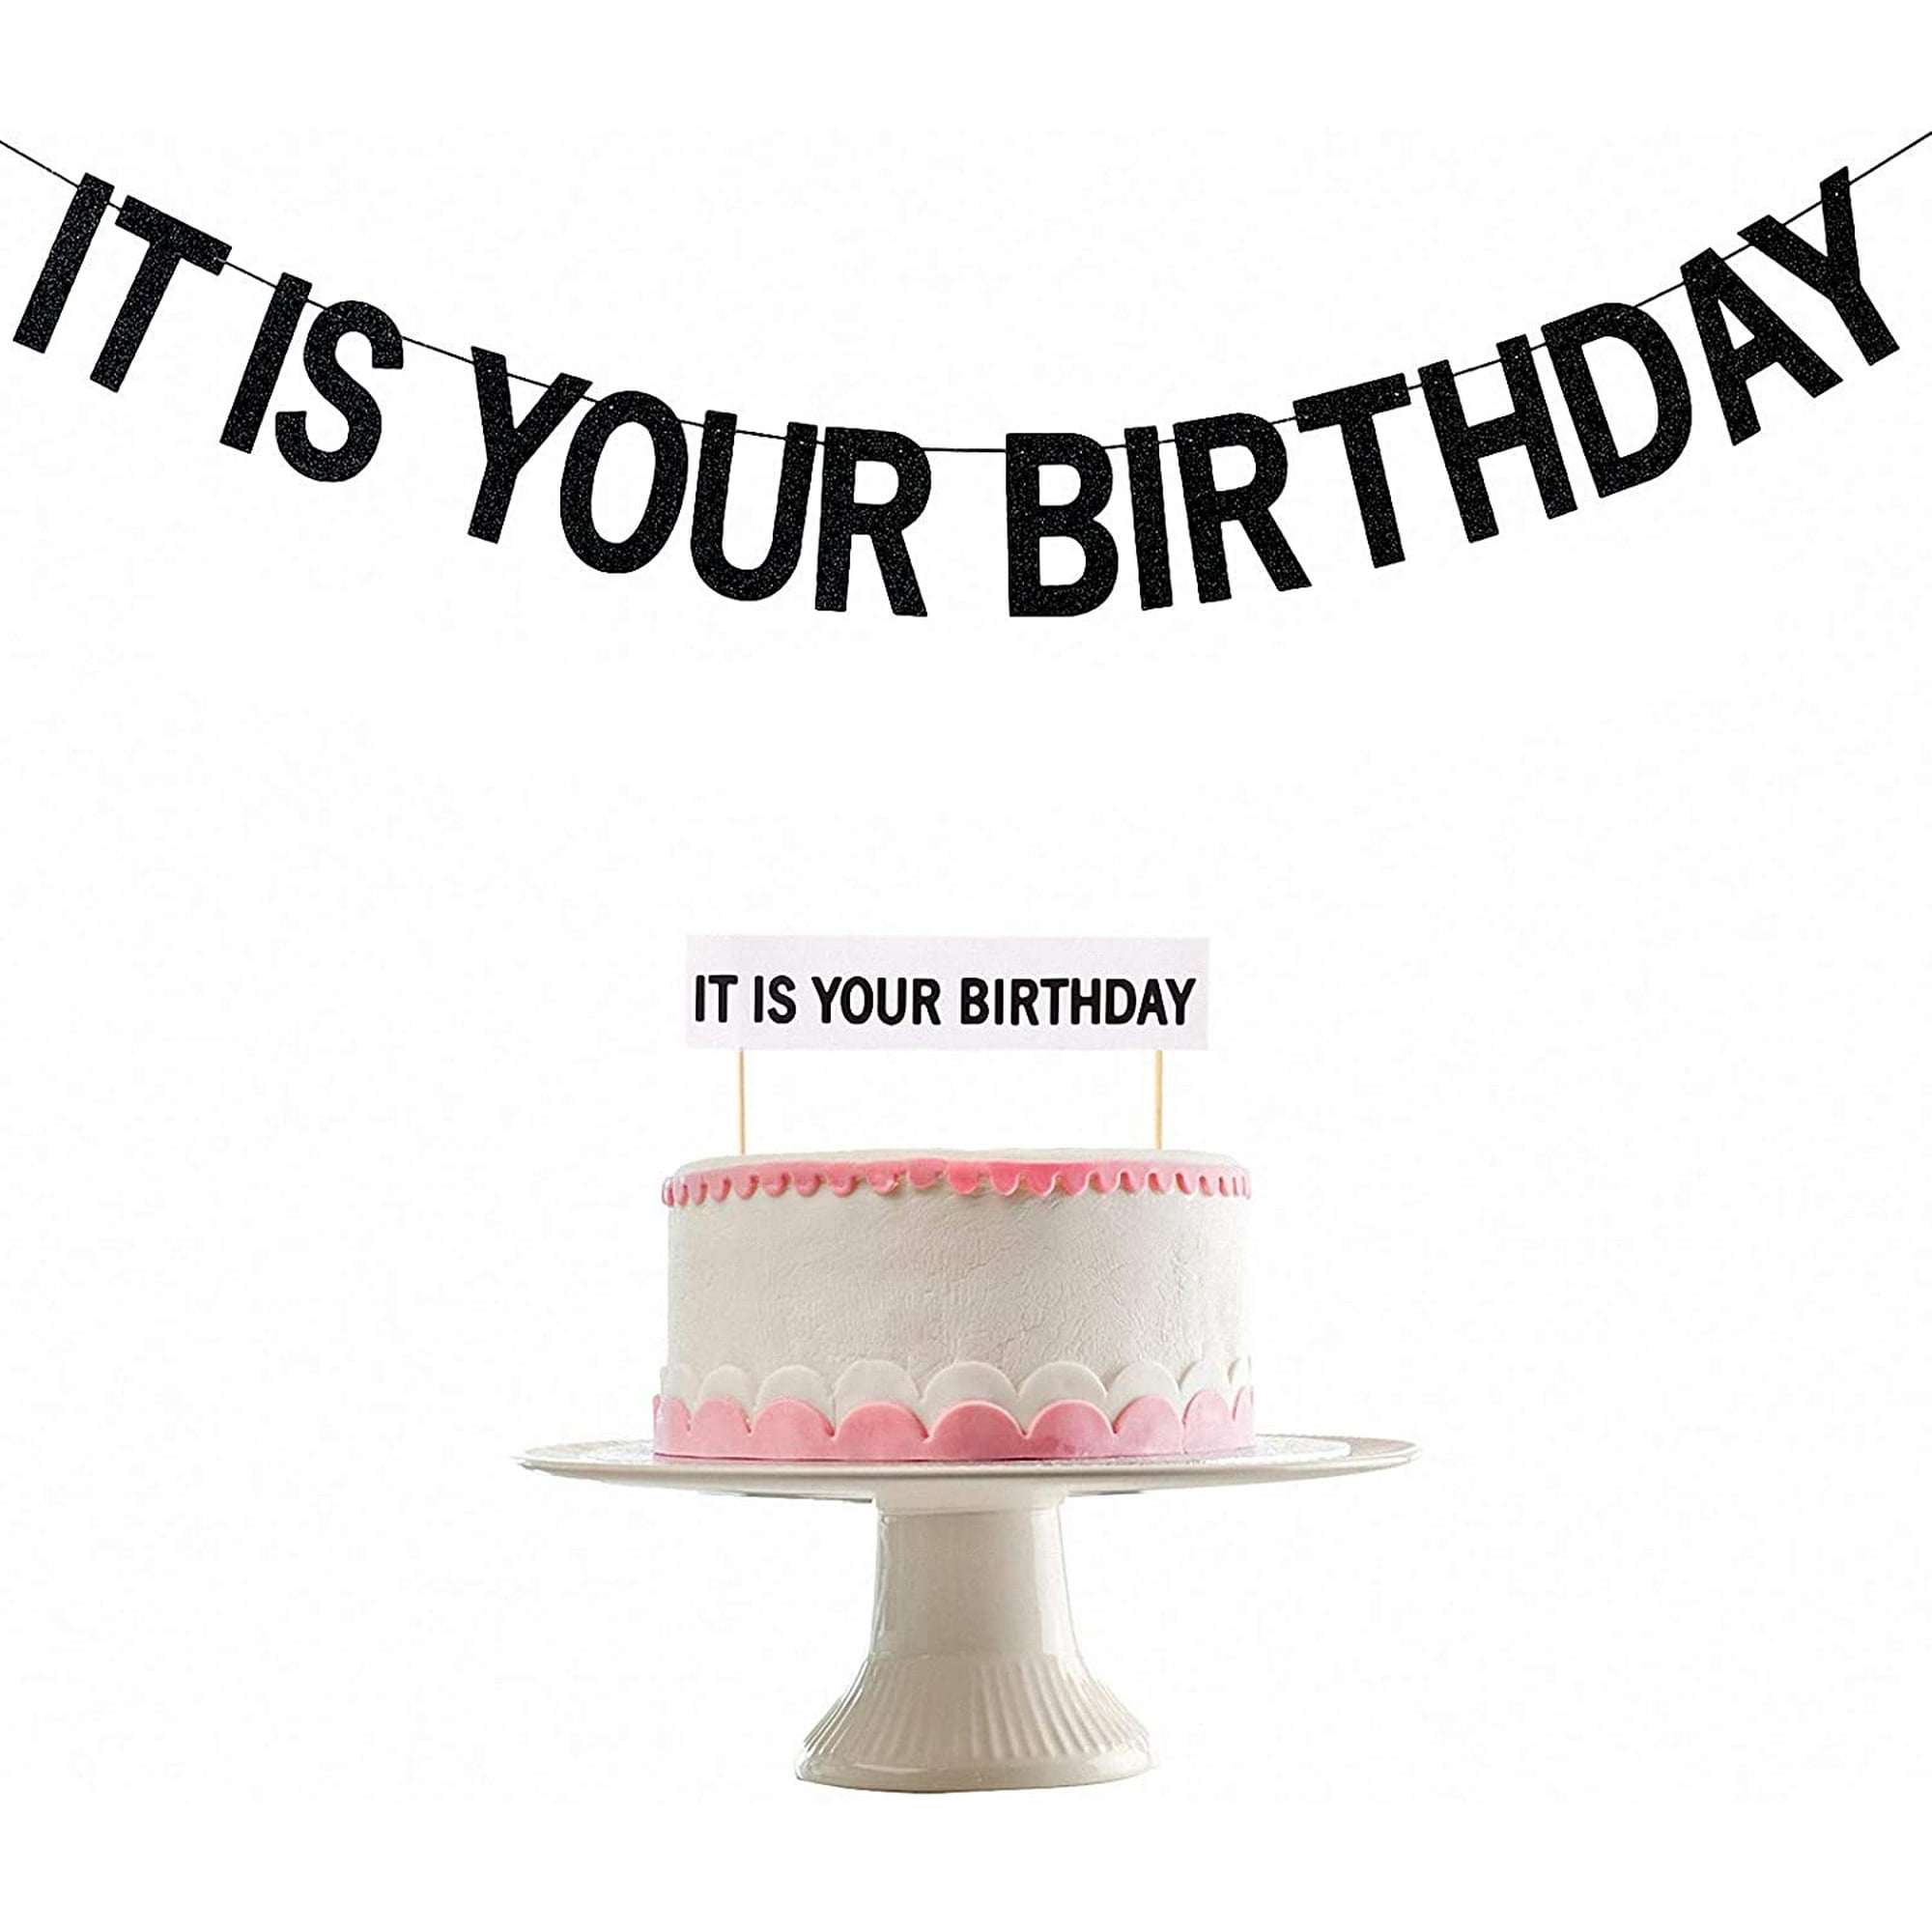 Black Glittery IT Is Your Birthday Banner and IT Is Your Birthday Cake  Topper- The Office Birthday Decorations,The Office Birthday Banner Decor,Office  Birthday Party Decorations | Walmart Canada